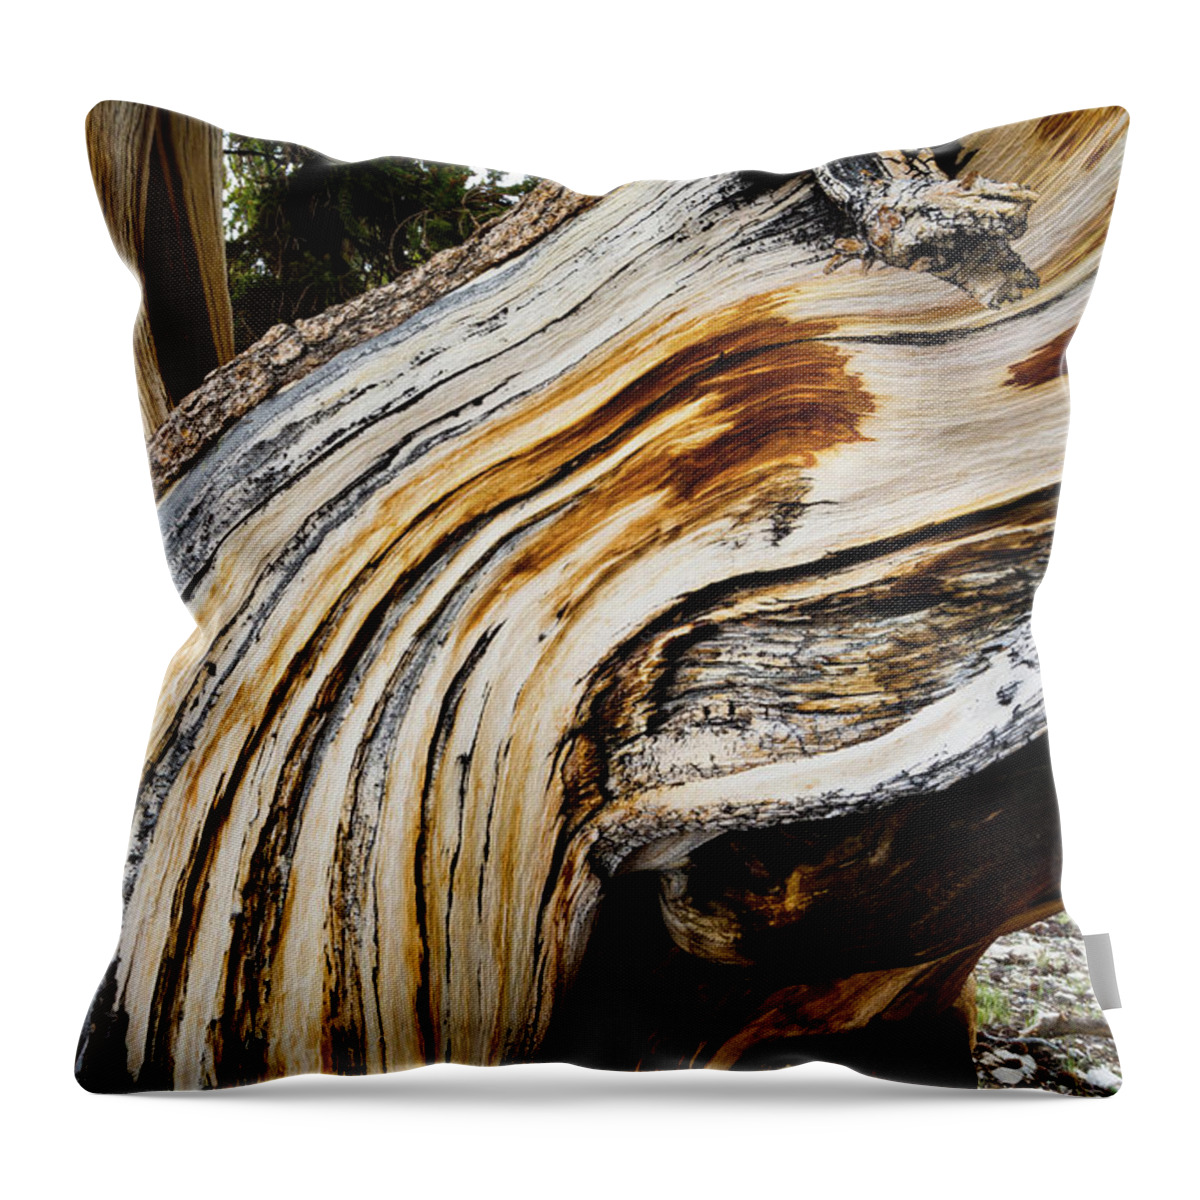 Photography Throw Pillow featuring the photograph Close-up Of Details Of Pine Tree by Panoramic Images